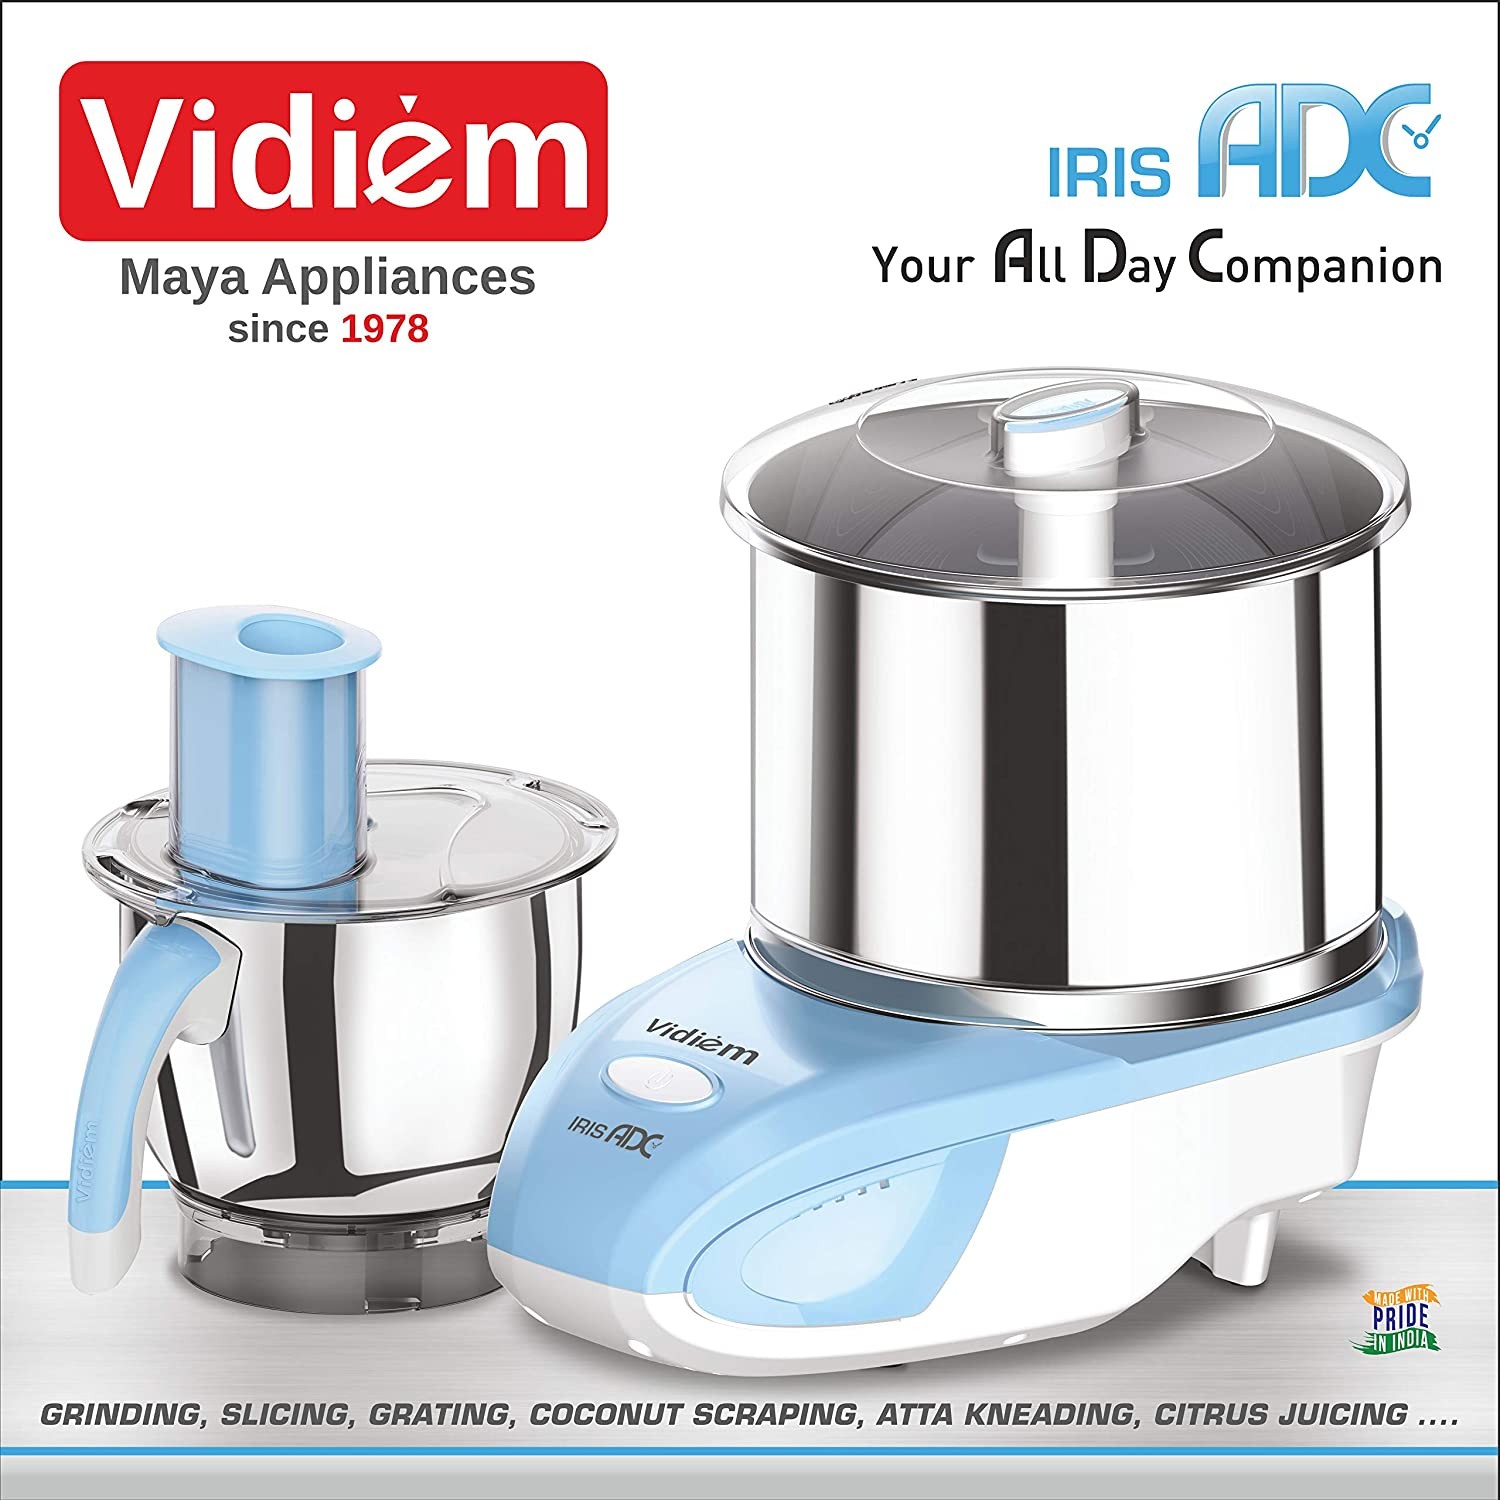 vidiem-iris-2l-multi-purpose-wet-grinder-ss-drum-stone-rollers-food-processor-multi-chef-jar-atta-kneader-110v90w-for-usa-canada-motor-rpm-1440-and-drum-rpm-150-home-commercial-use4